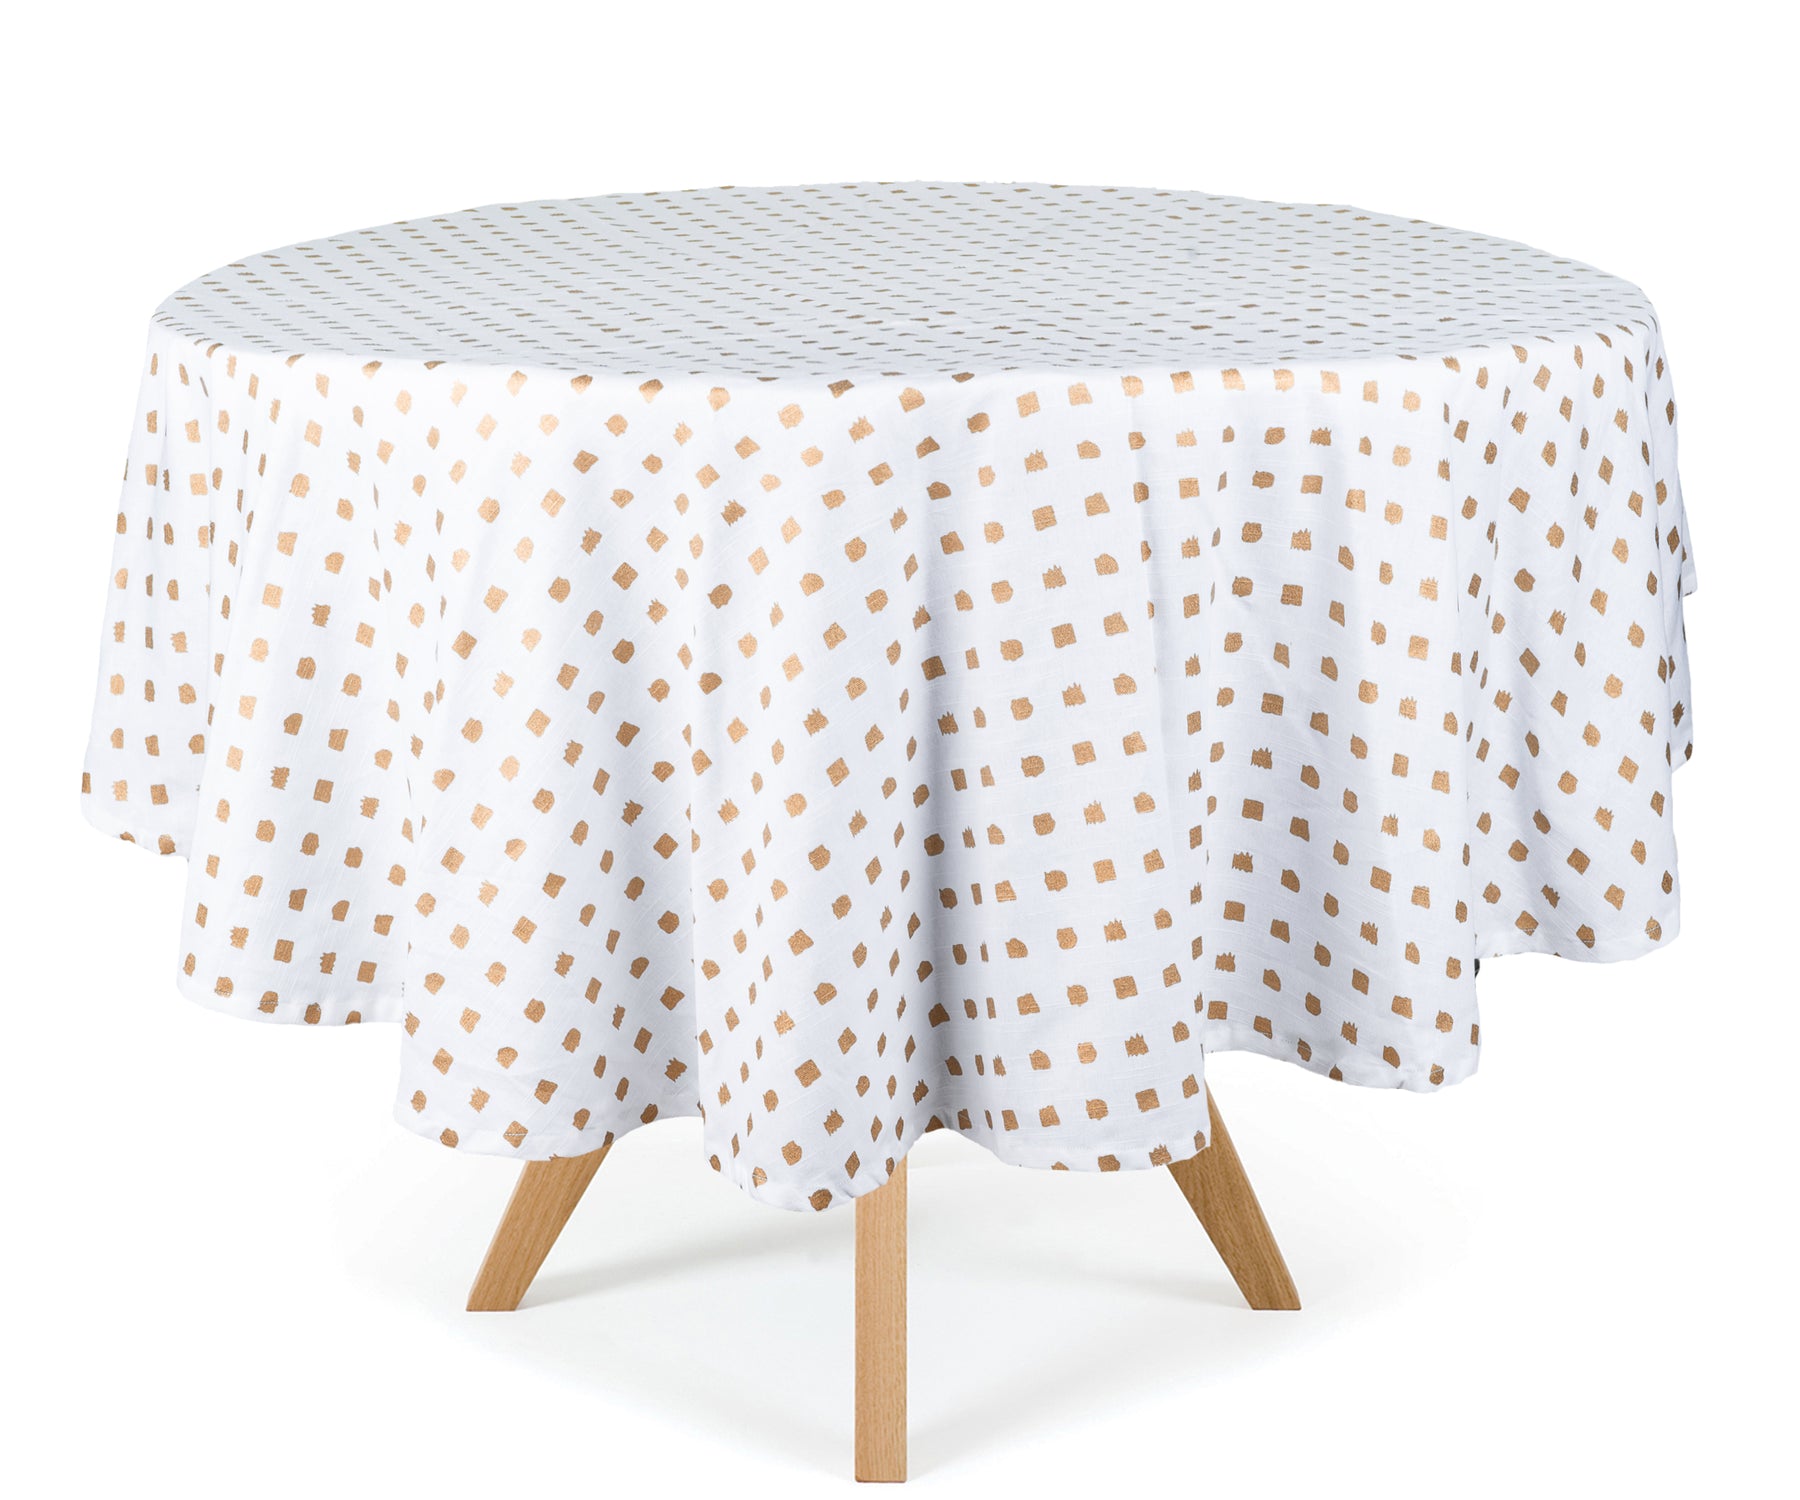 Round cotton tablecloths come in various colors, patterns, and sizes to suit different preferences and table sizes. Gold Metallic Tablecloth, Silver Metallic Tablecloth